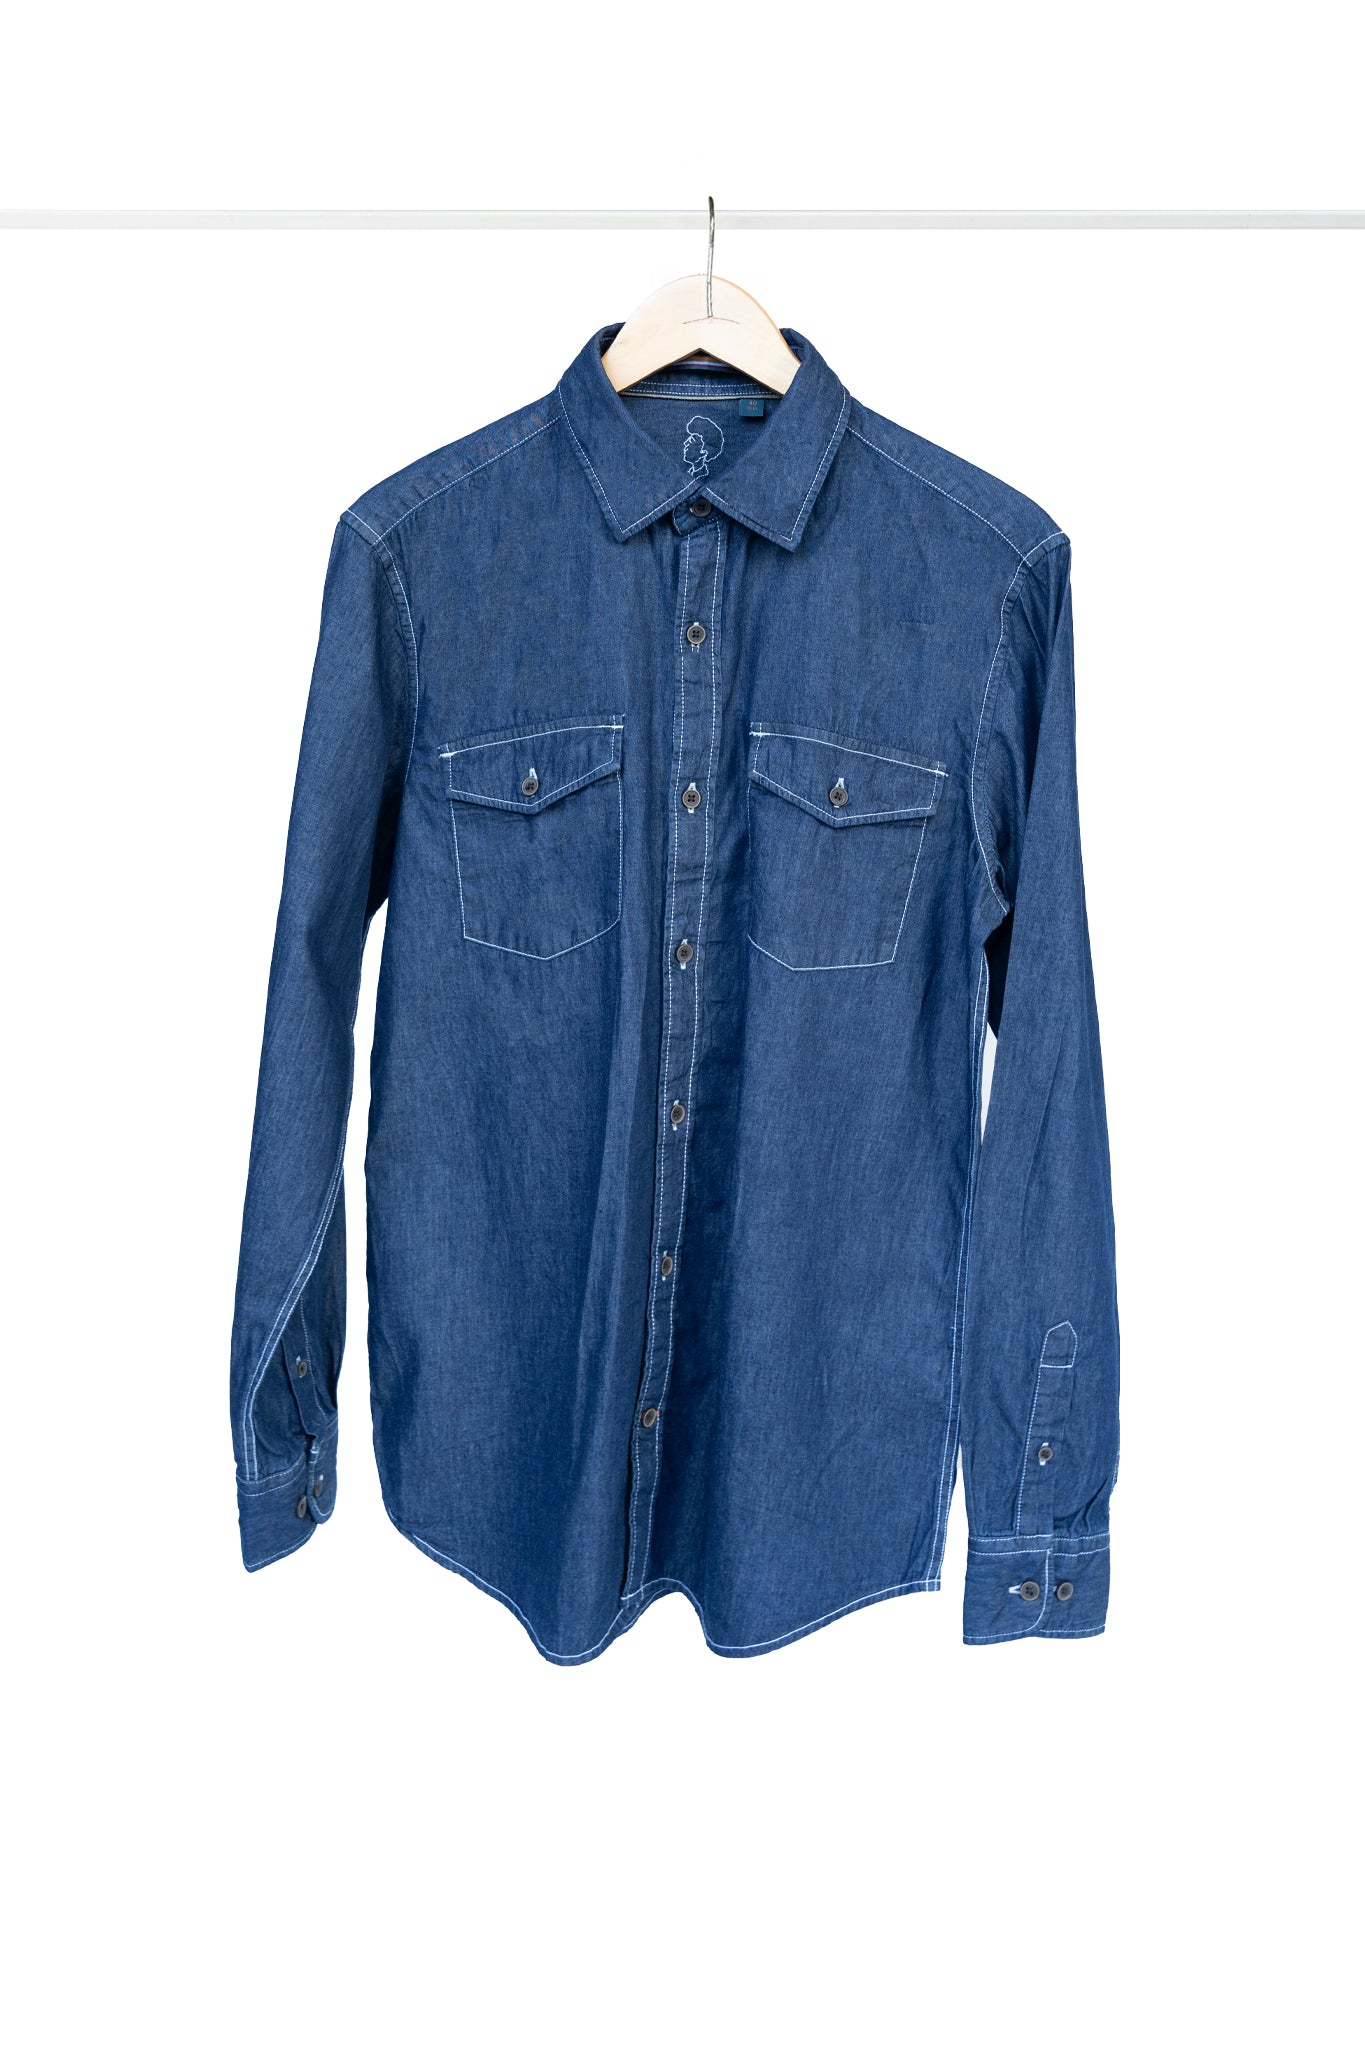 Bare Brown Denim Shirt, Slim Fit with Full Sleeves - Navy Blue